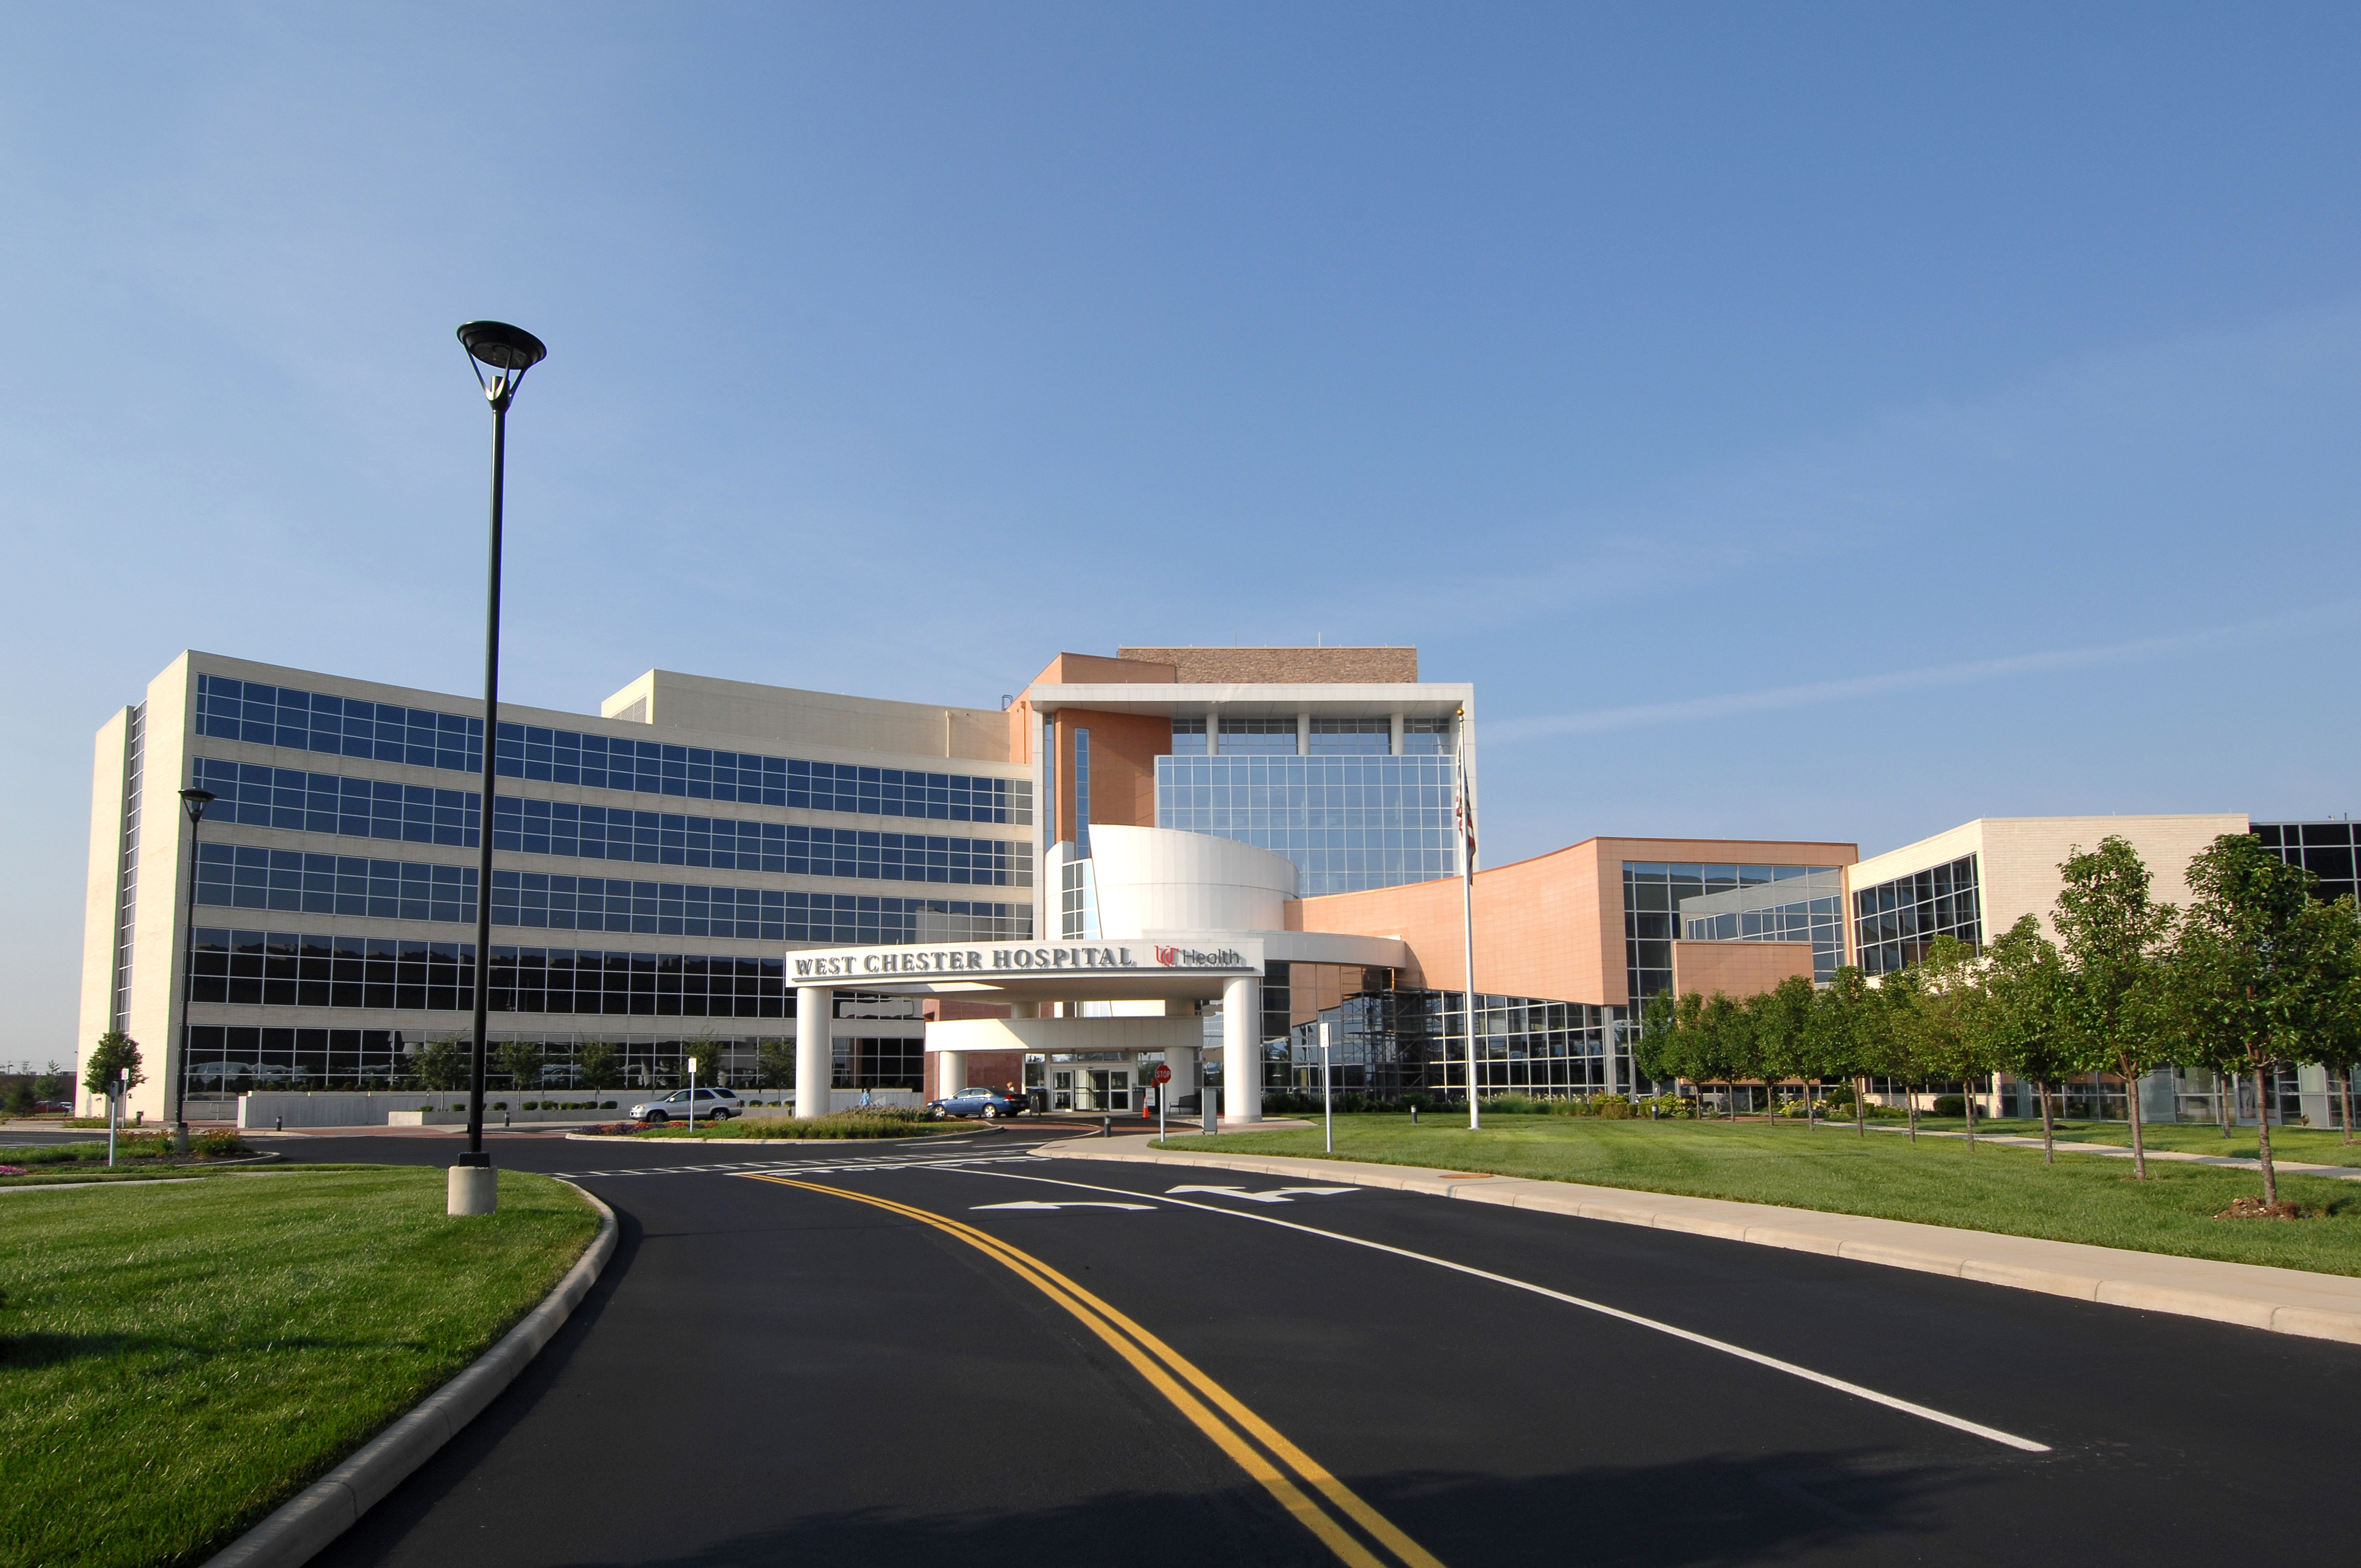  West Chester Hospital  Re Designated as an Aetna Institute 